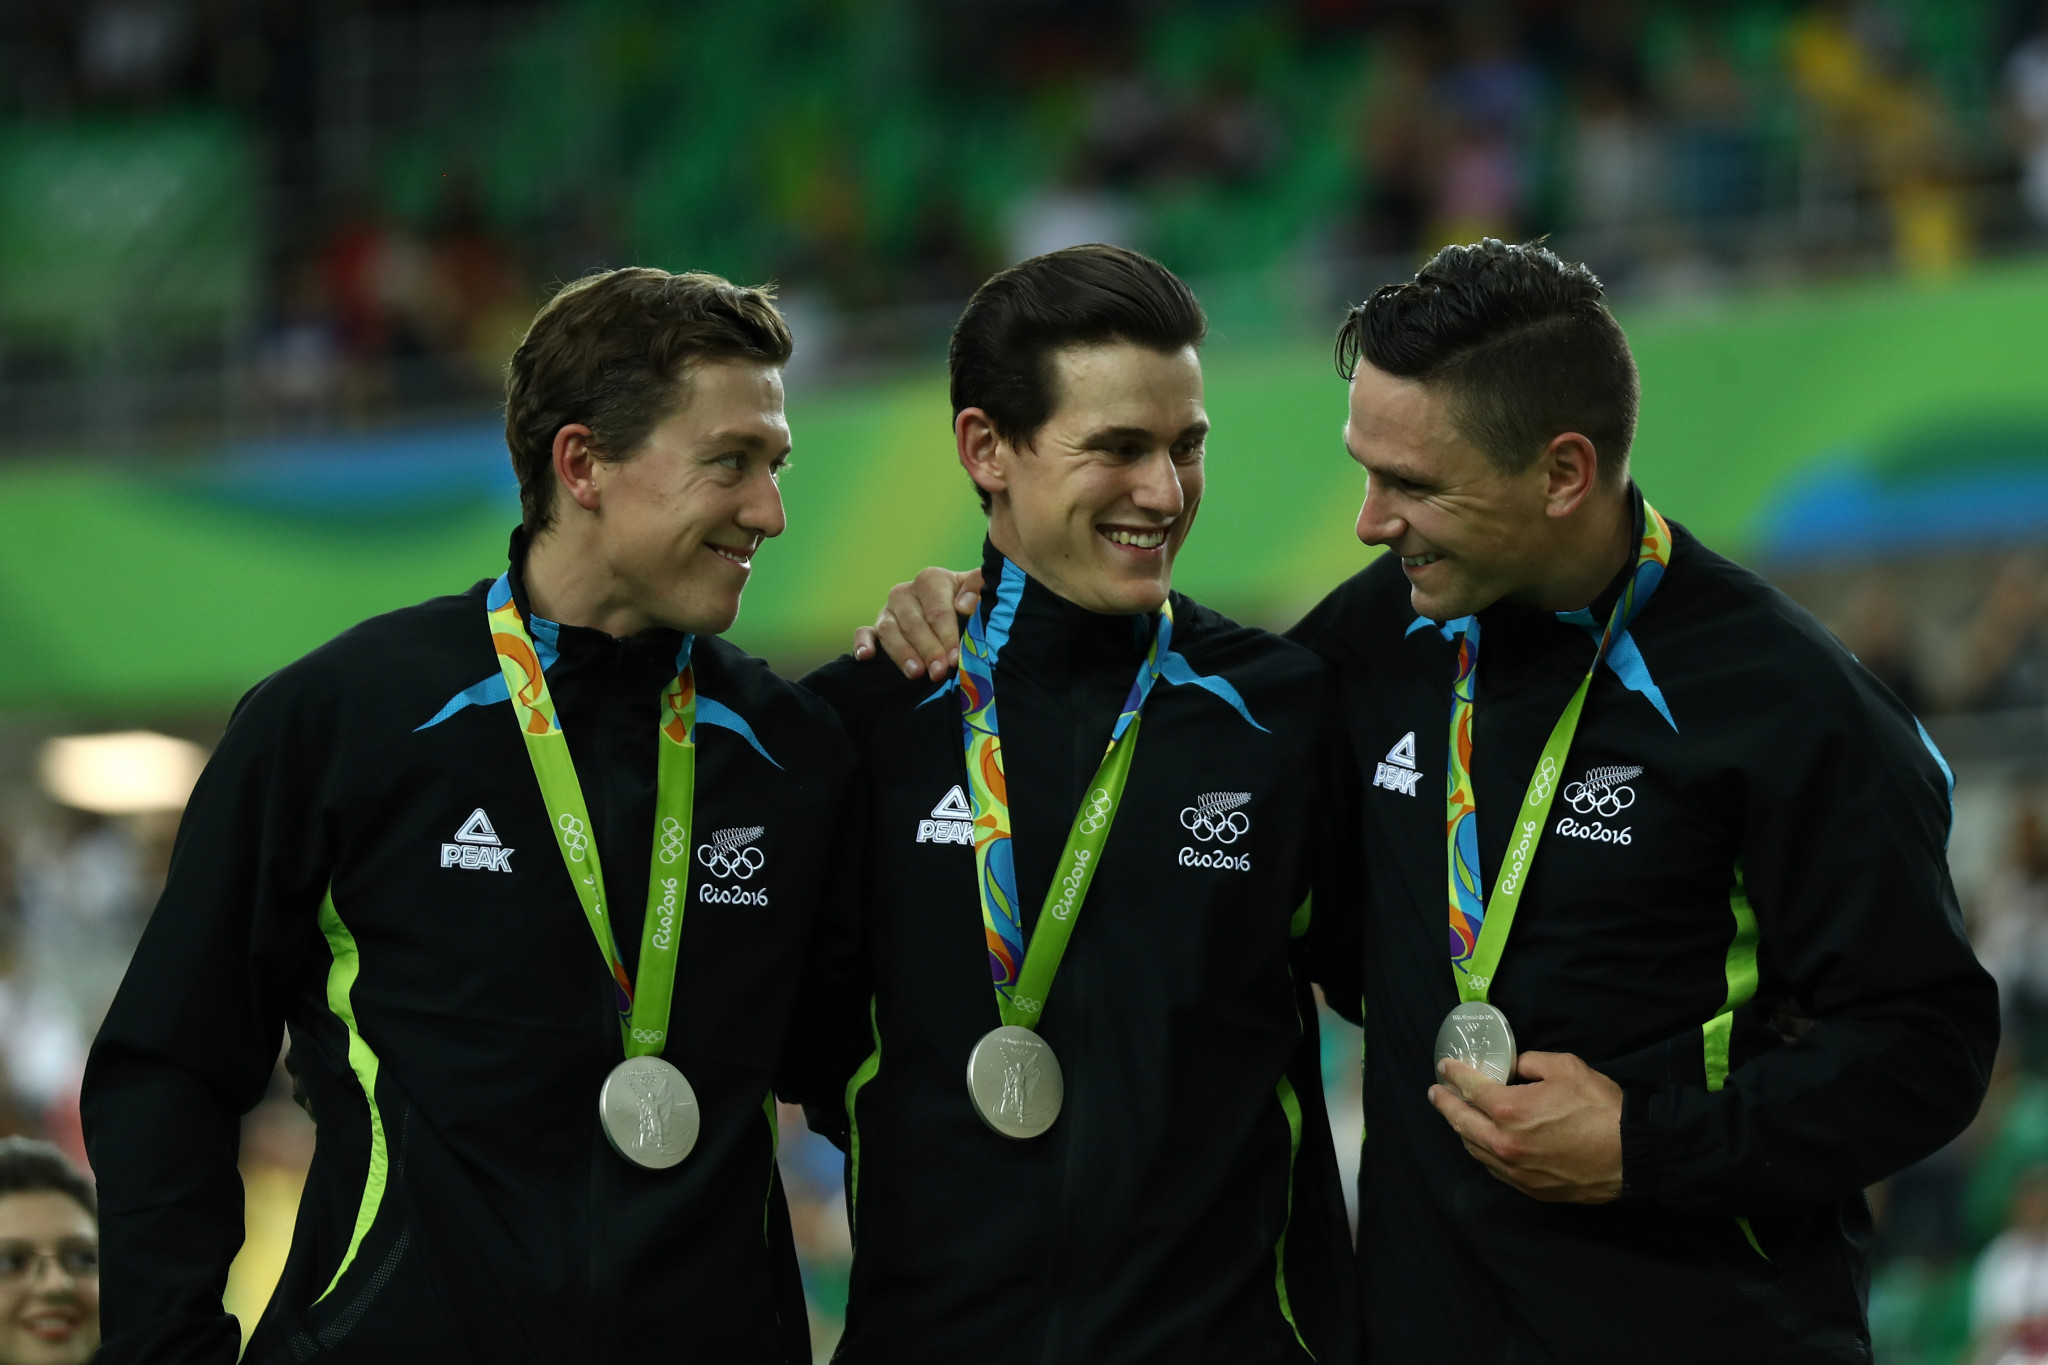 Ethan Mitchell, left, and Sam Webster, centre, have been included in New Zealand's team for Tokyo 2020 after winning team sprint silver at Rio 2016 alongside Edward Dawkins ©Getty Images